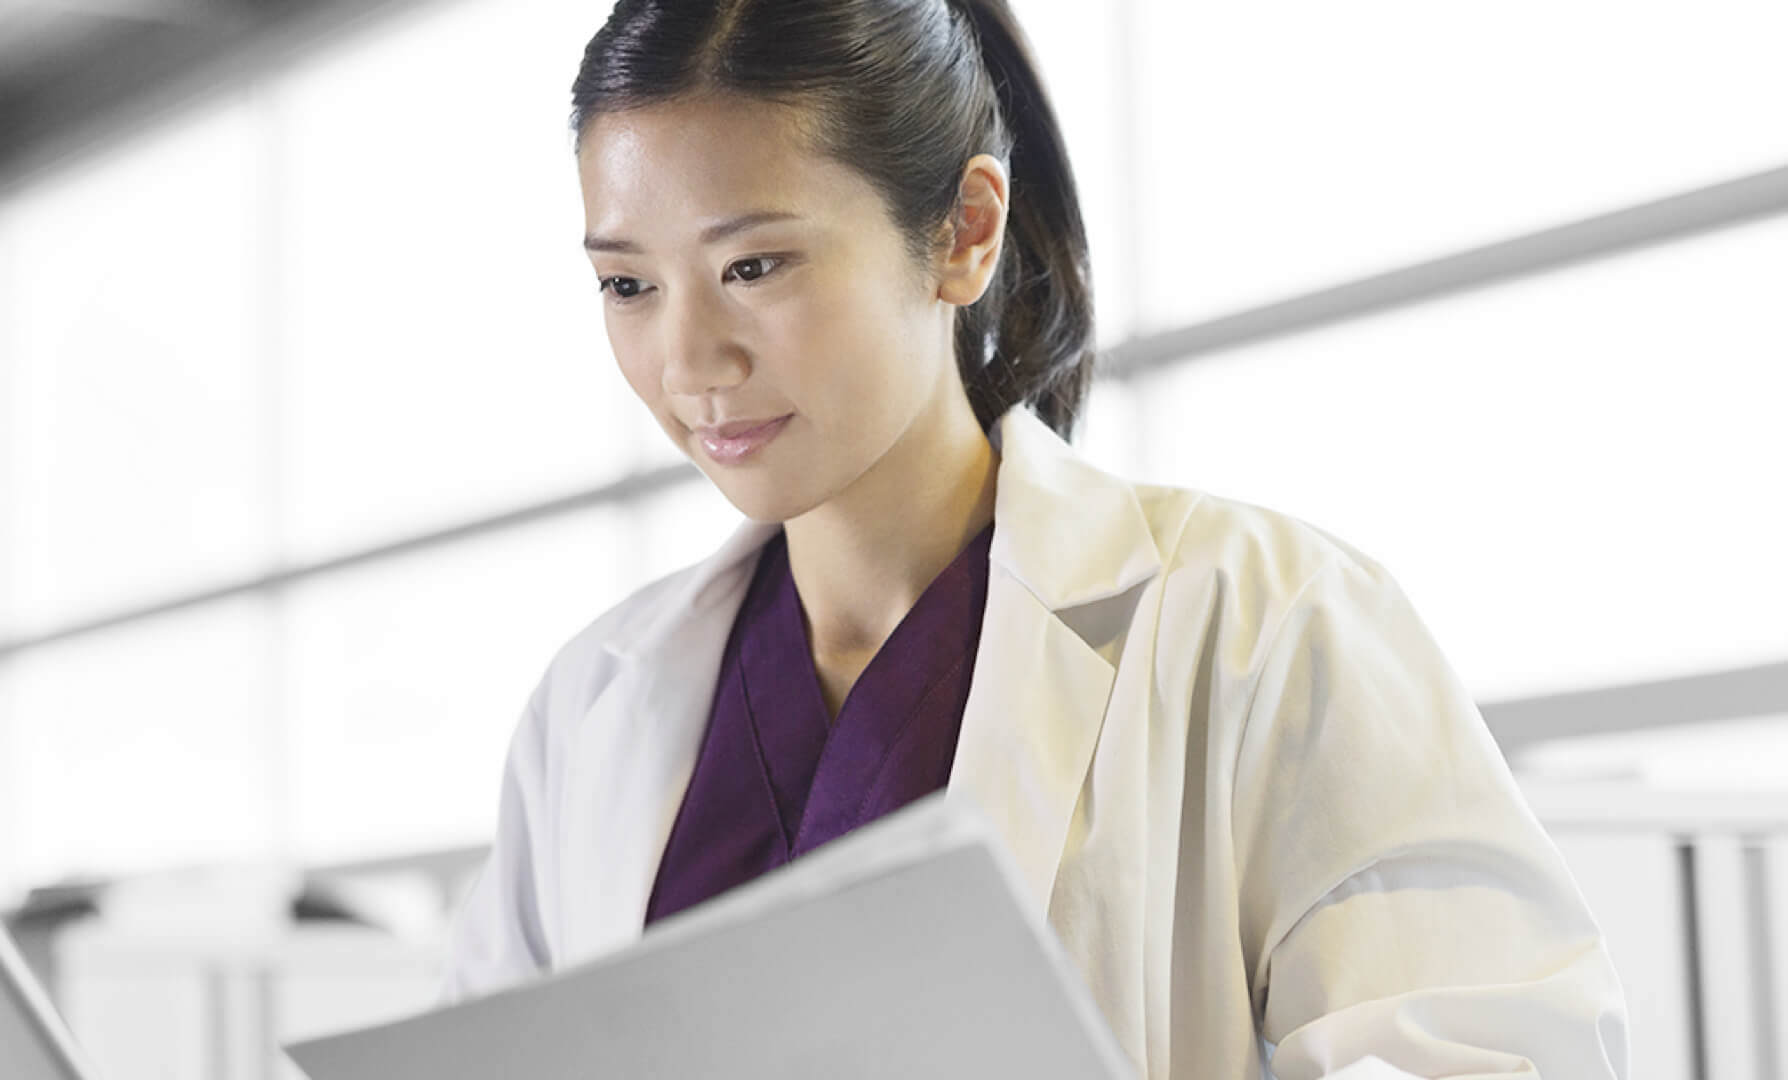 A woman in a white lab coat looking at a computer.